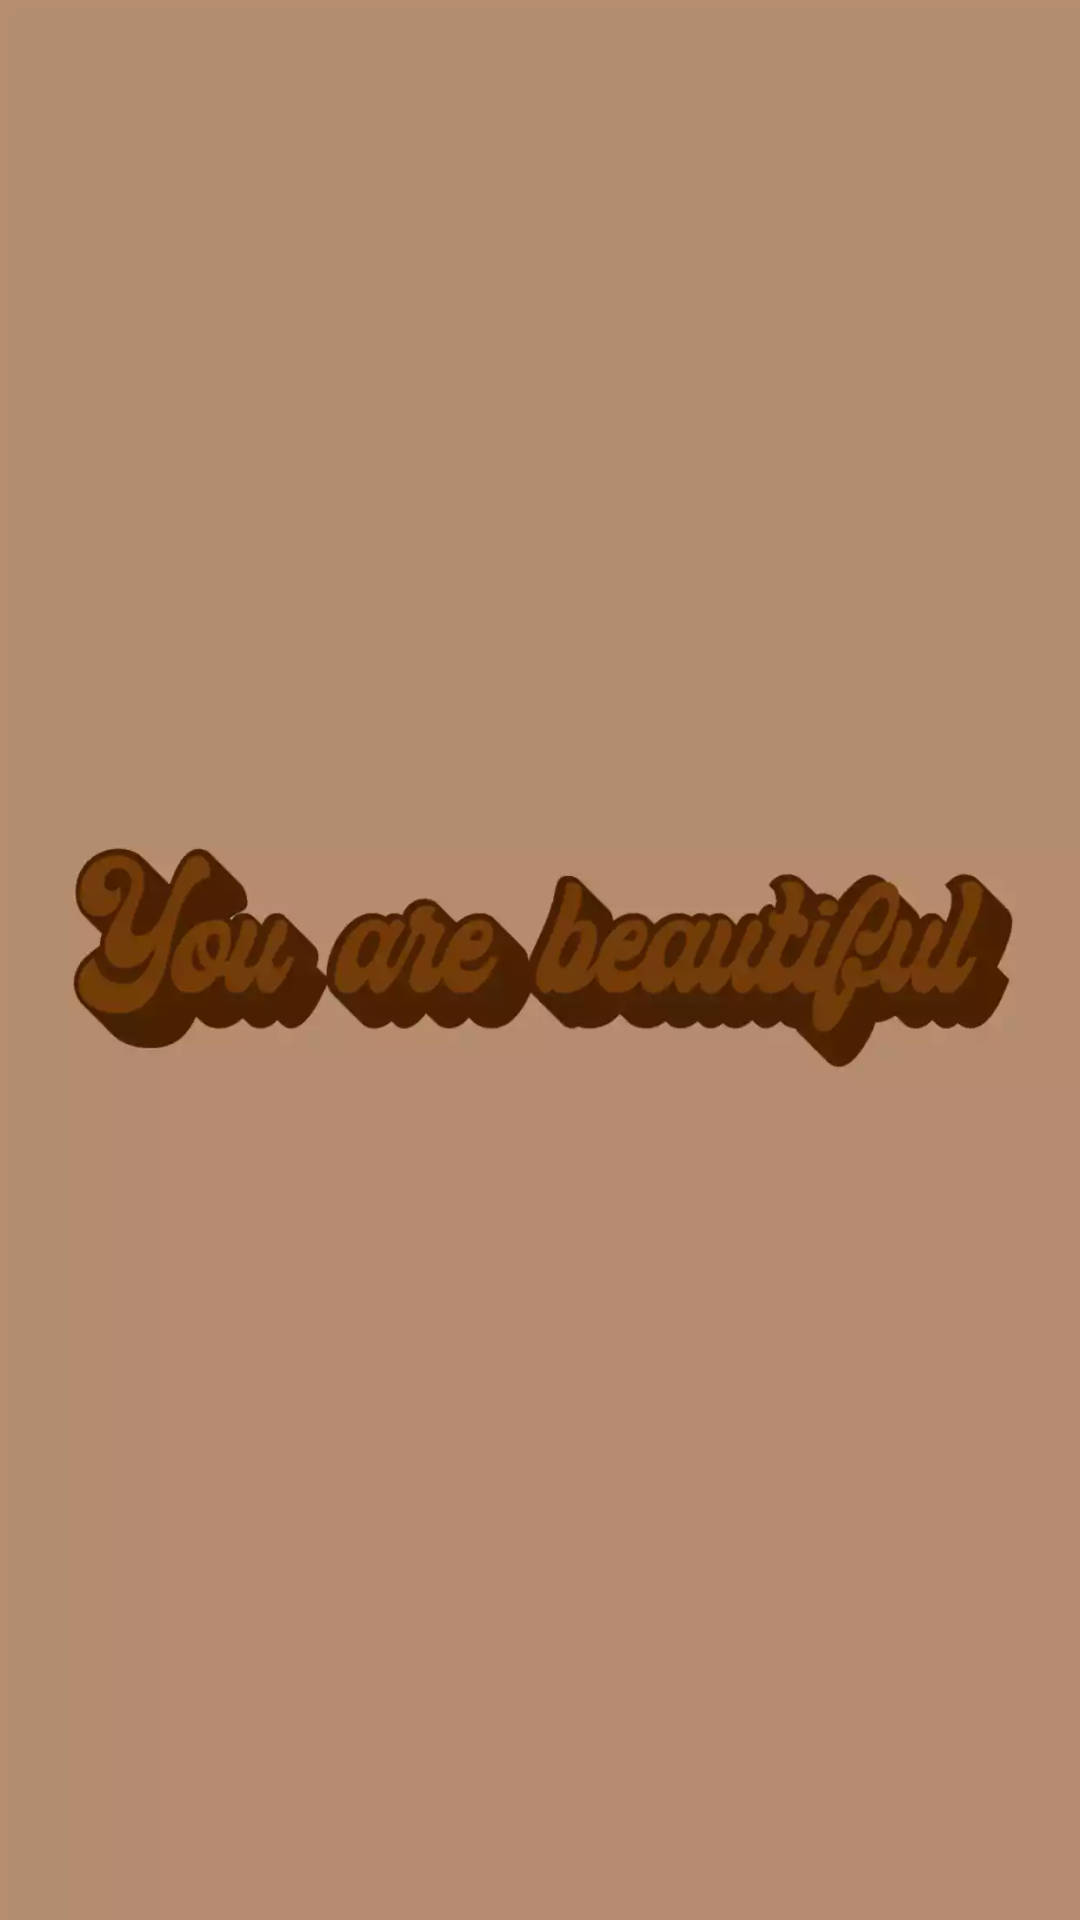 Light Brown You Are Beautiful Wallpaper